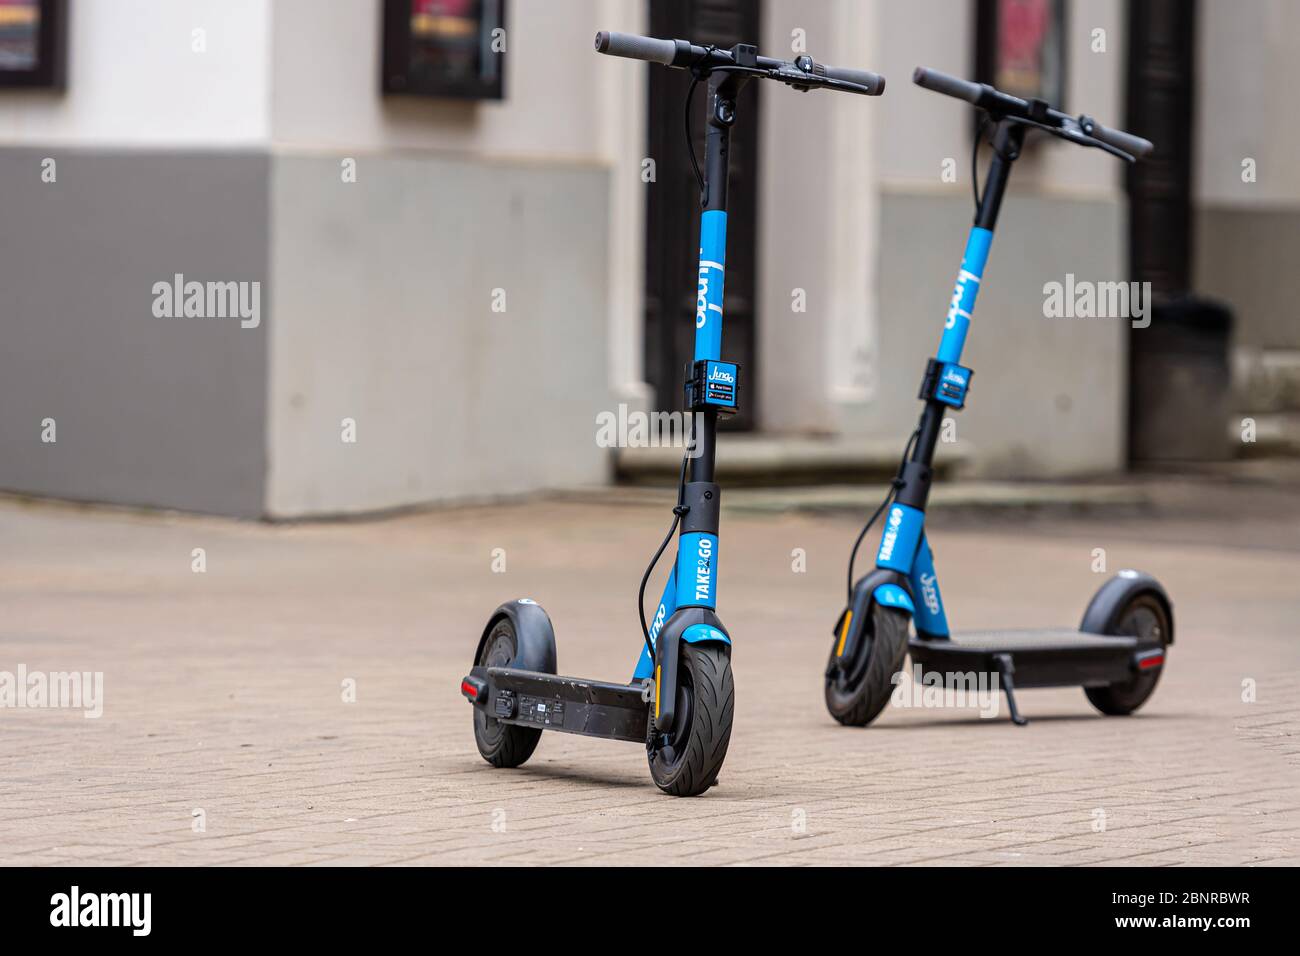 Riga, Latvia - May 14, 2020: two dockless rental electric scooters is  parked on the sidewalk, ecological urban transport concept Stock Photo -  Alamy